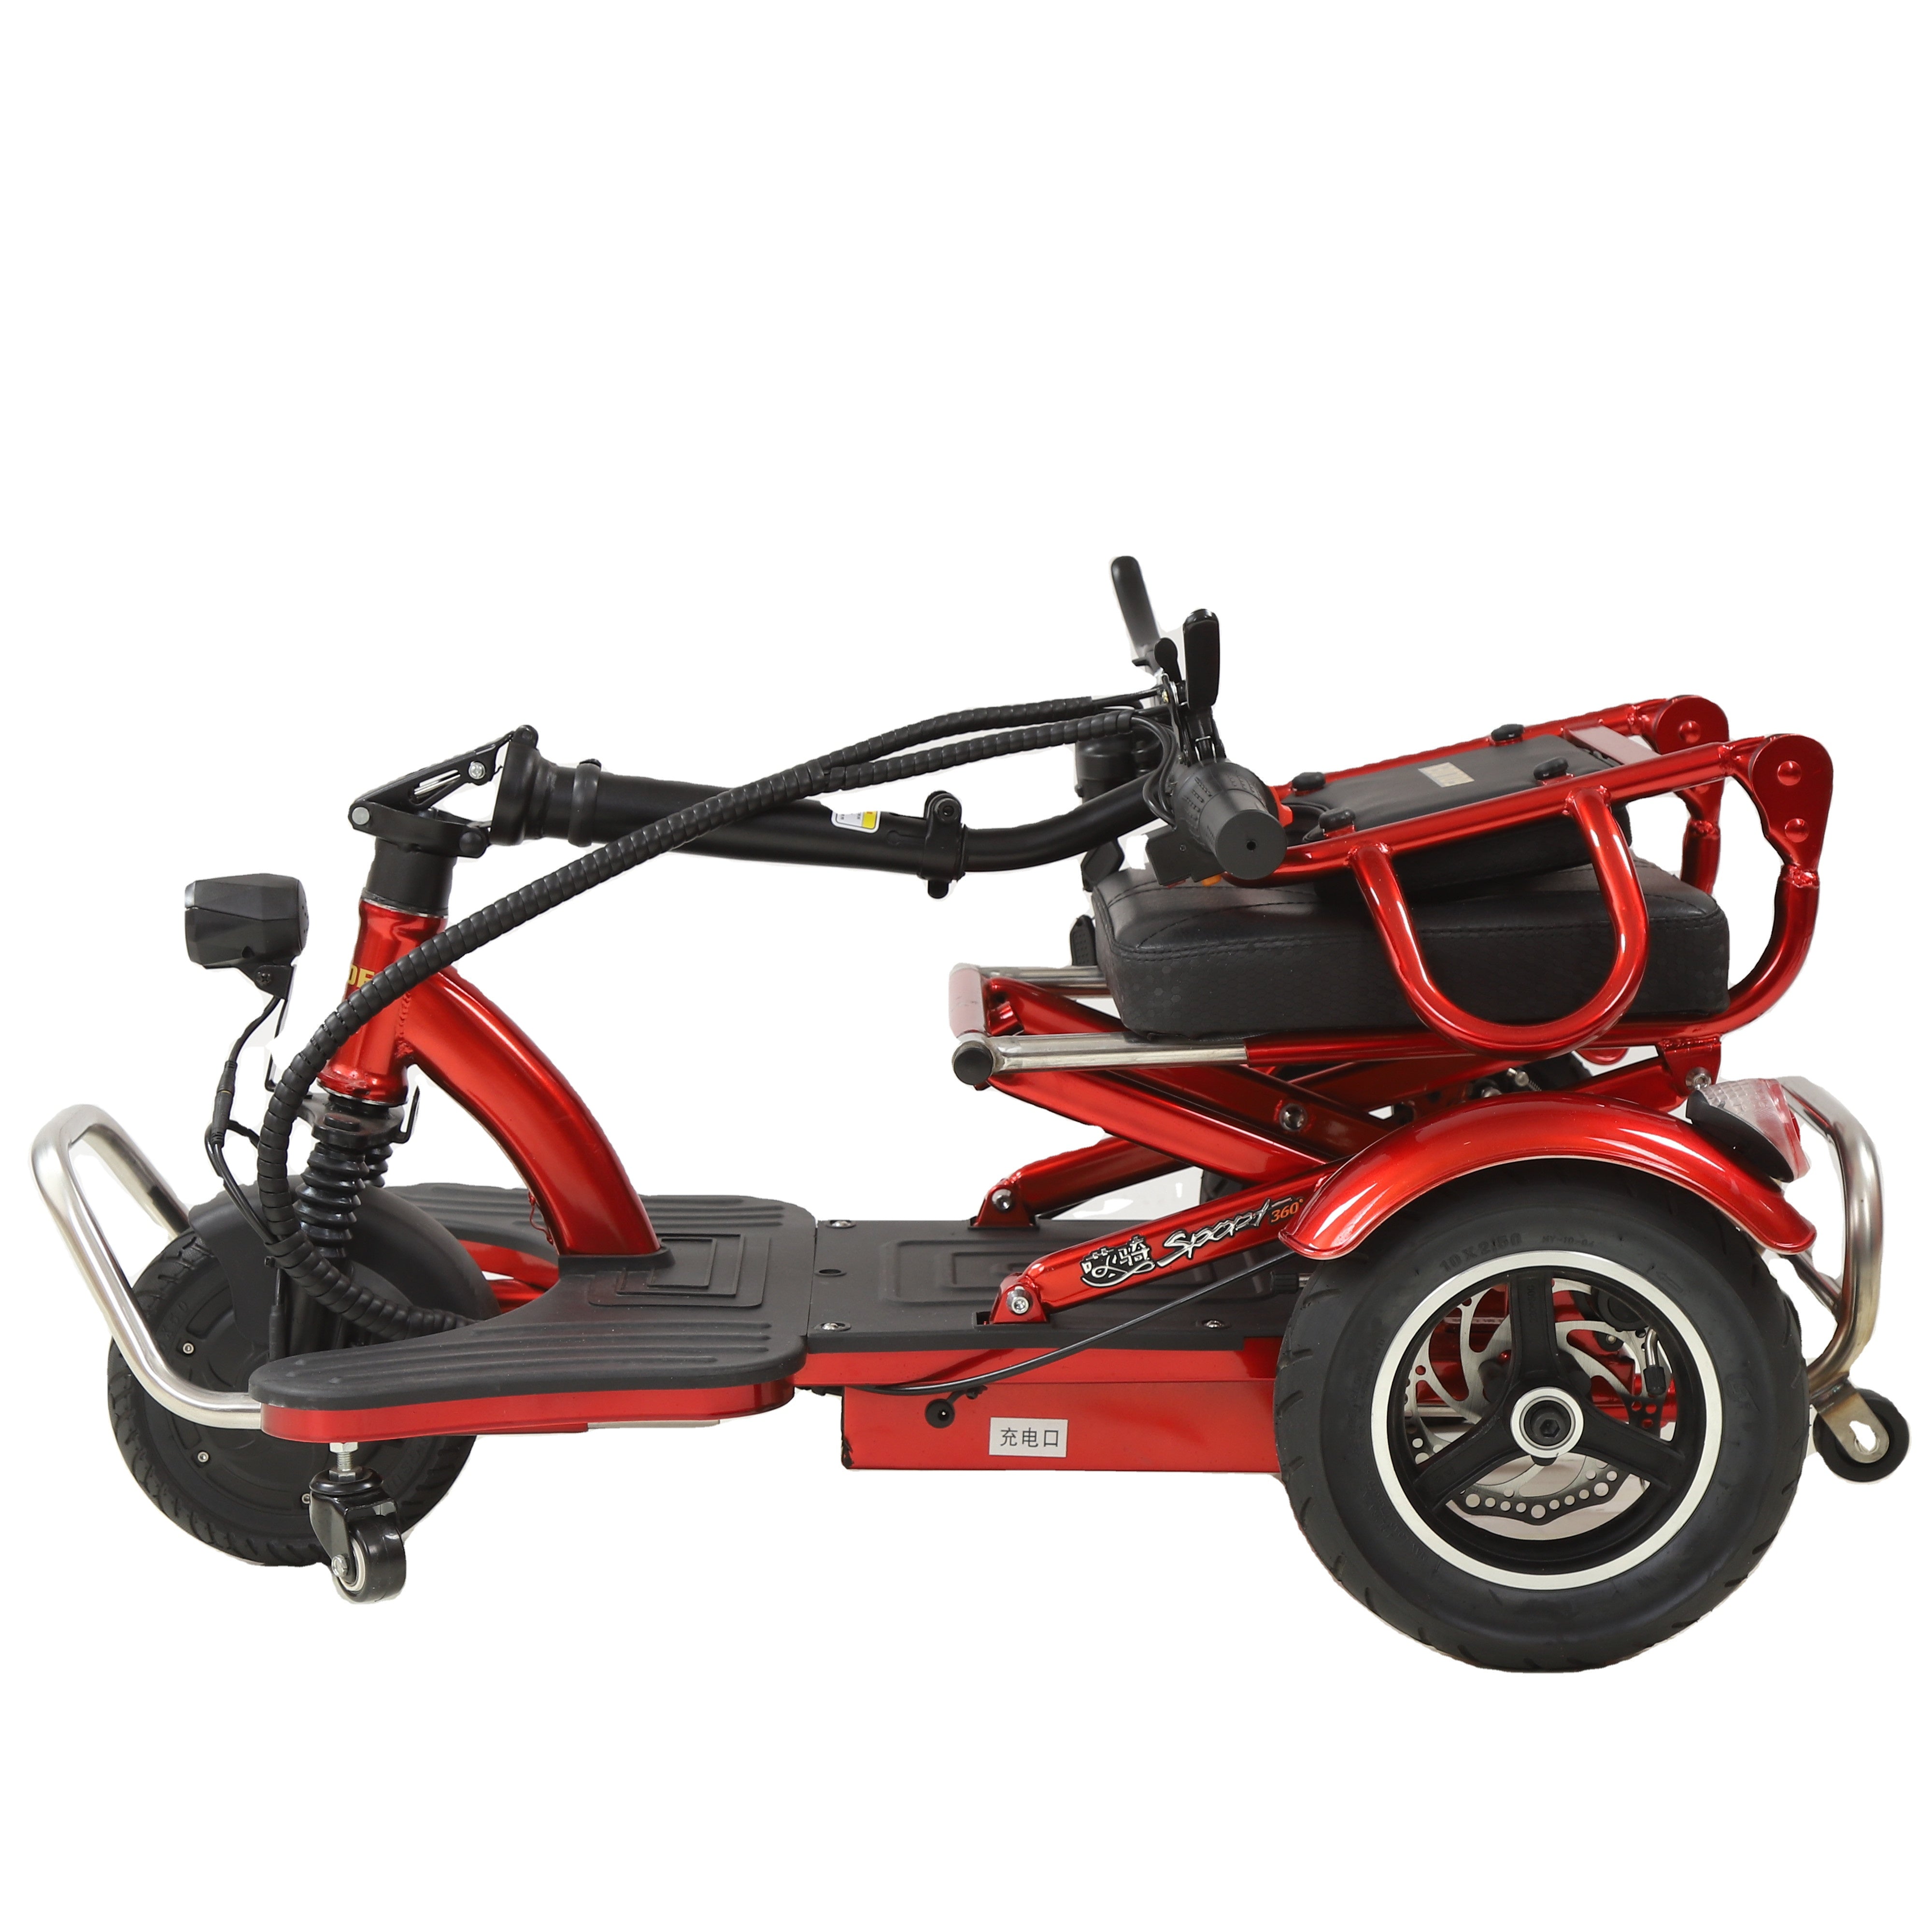 3 Wheel Transport Vehicle Three Wheels Mini Motorcycle /cheap Motorcycle/electric Electric Scooter With Roof | Electrr Inc